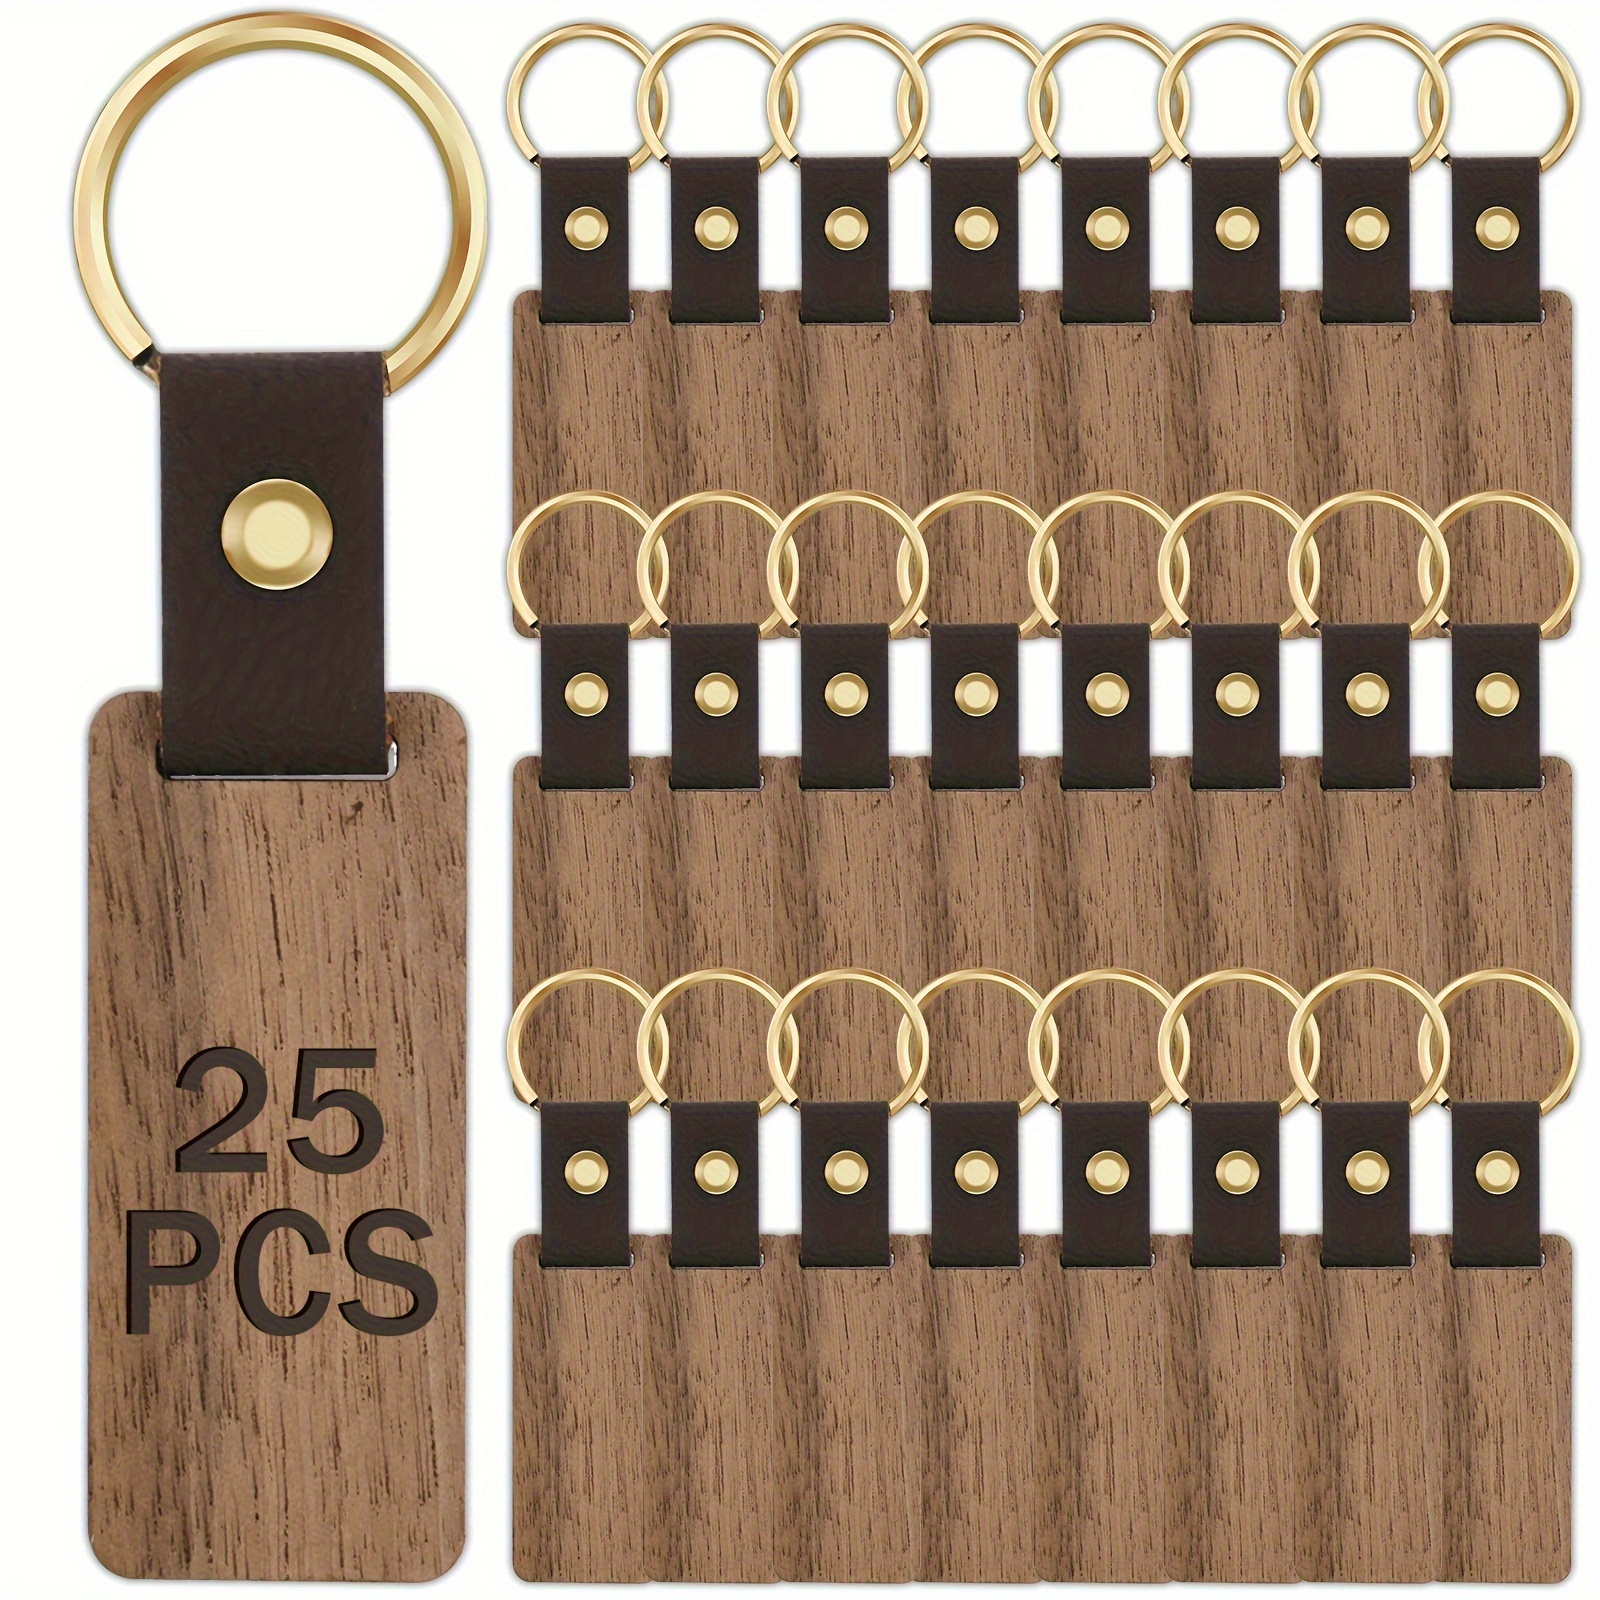 

25pcs Wooden Keychain Blanks Diy Blank Wood Keychains With Leather Straps Walnut Wood Keyring Blanks Unfinished Wooden Keychains For Engraving Key Tags Wood Crafts For Diy Key Chains 6.5x2.8cm